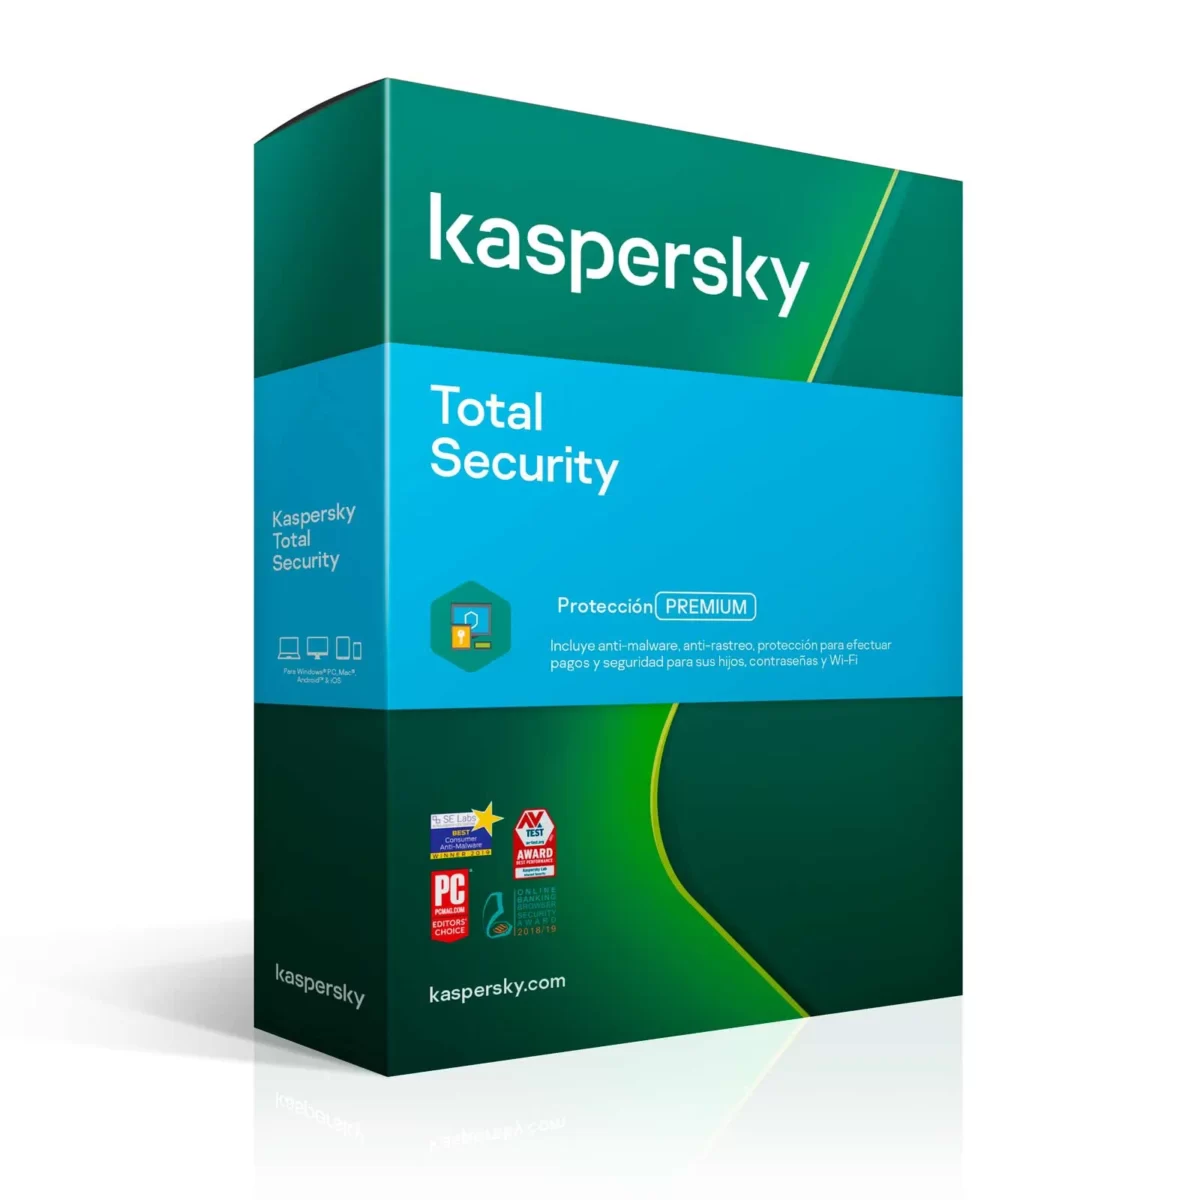 kaspersky-total-security-3-dispositivos-x-1-ano-wirtec